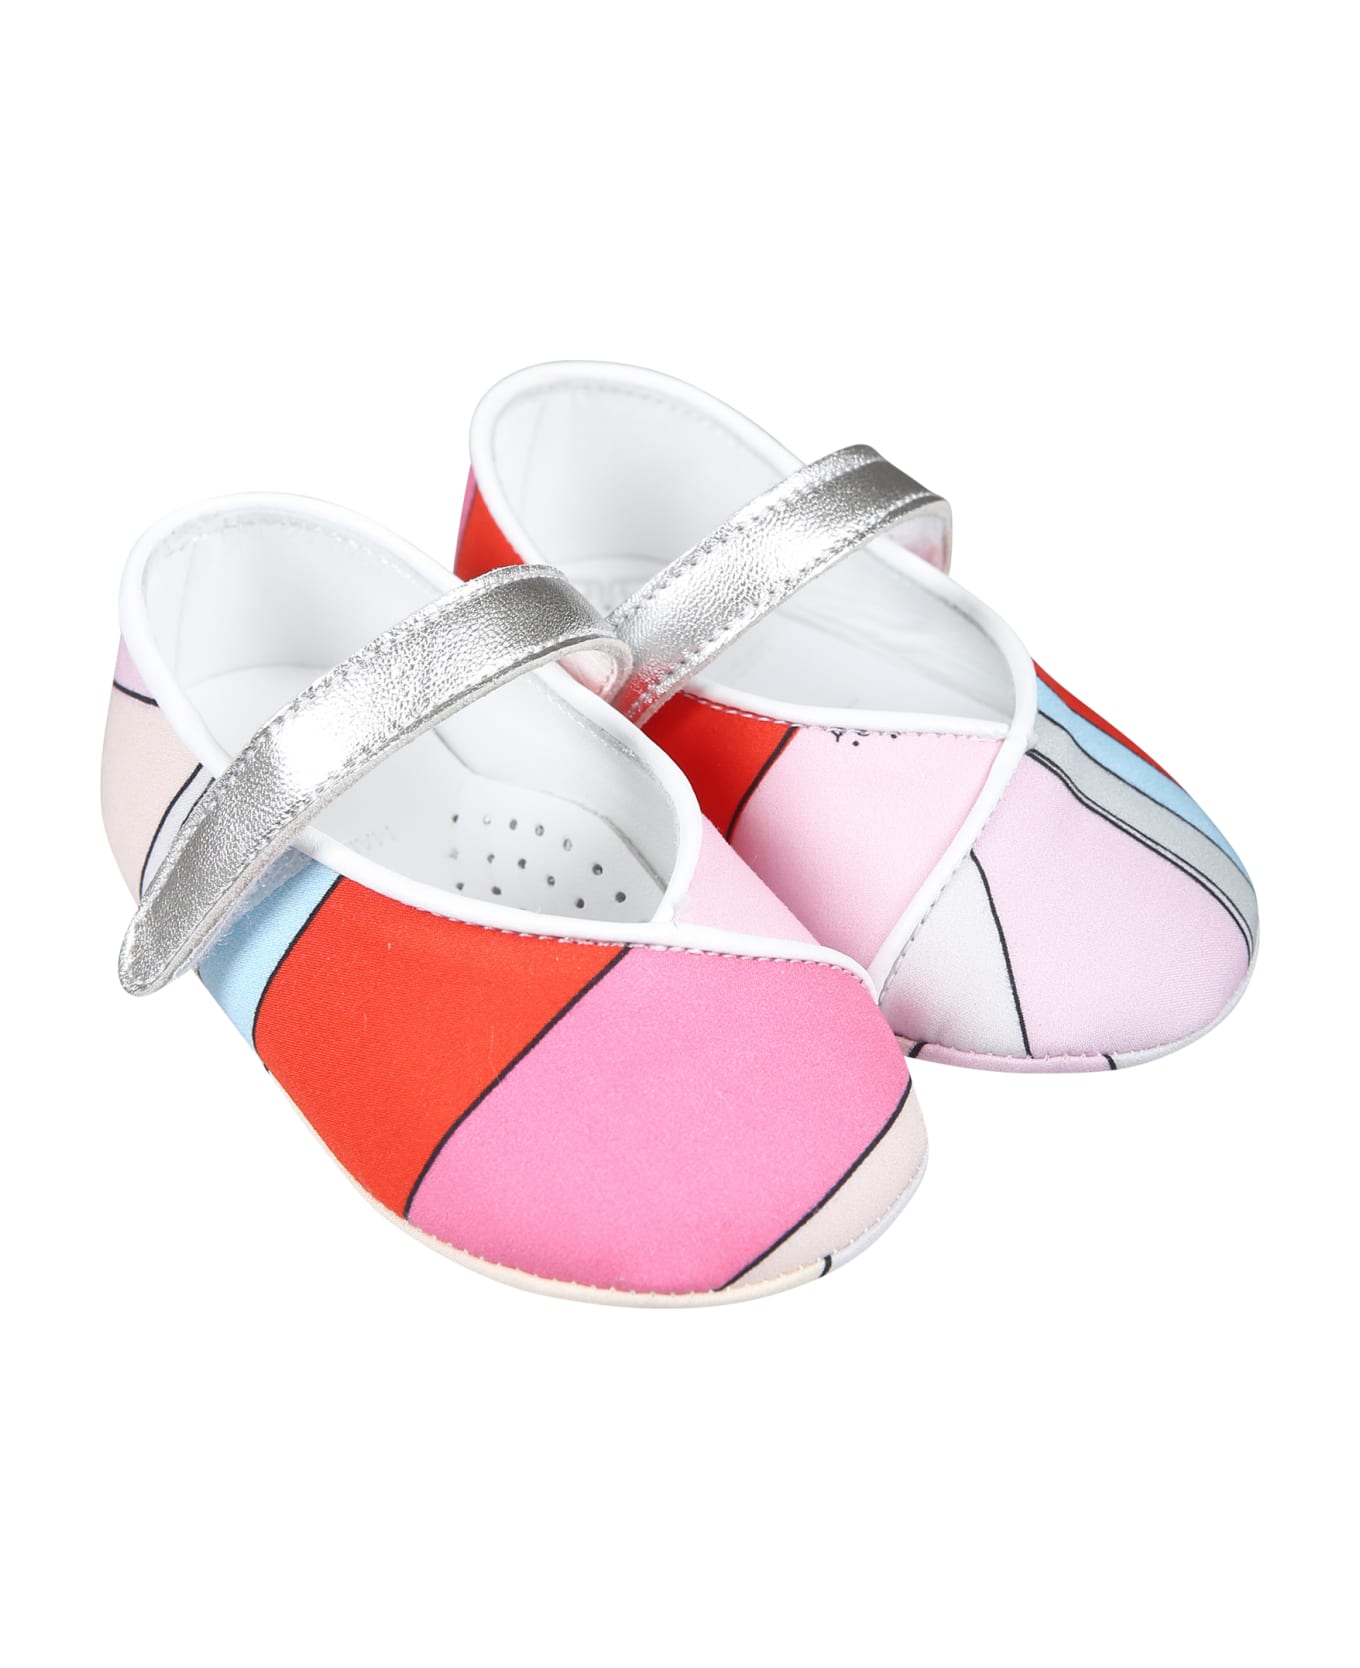 Pucci Multicolor Ballet Flats For Baby Girl With Print - Multicolor シューズ